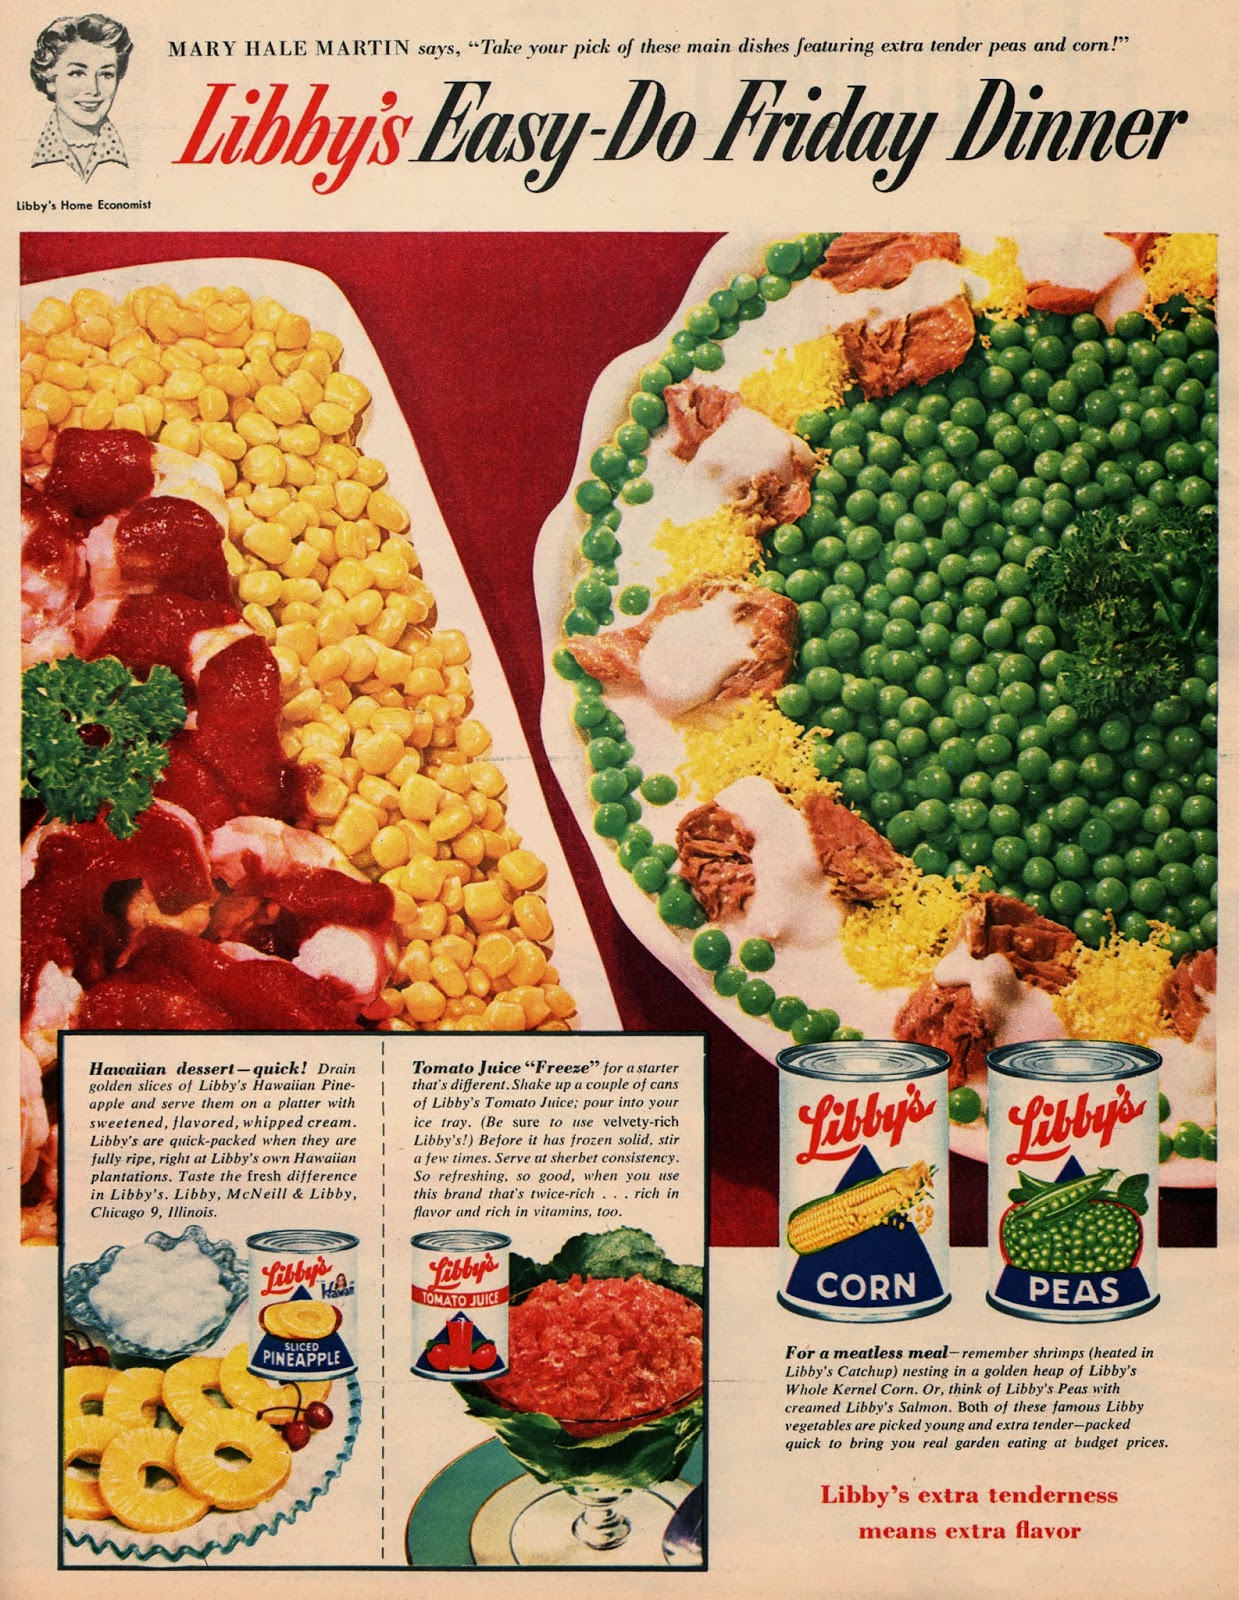 14-interesting-vintage-food-ads-from-the-1950s-vintage-advertising